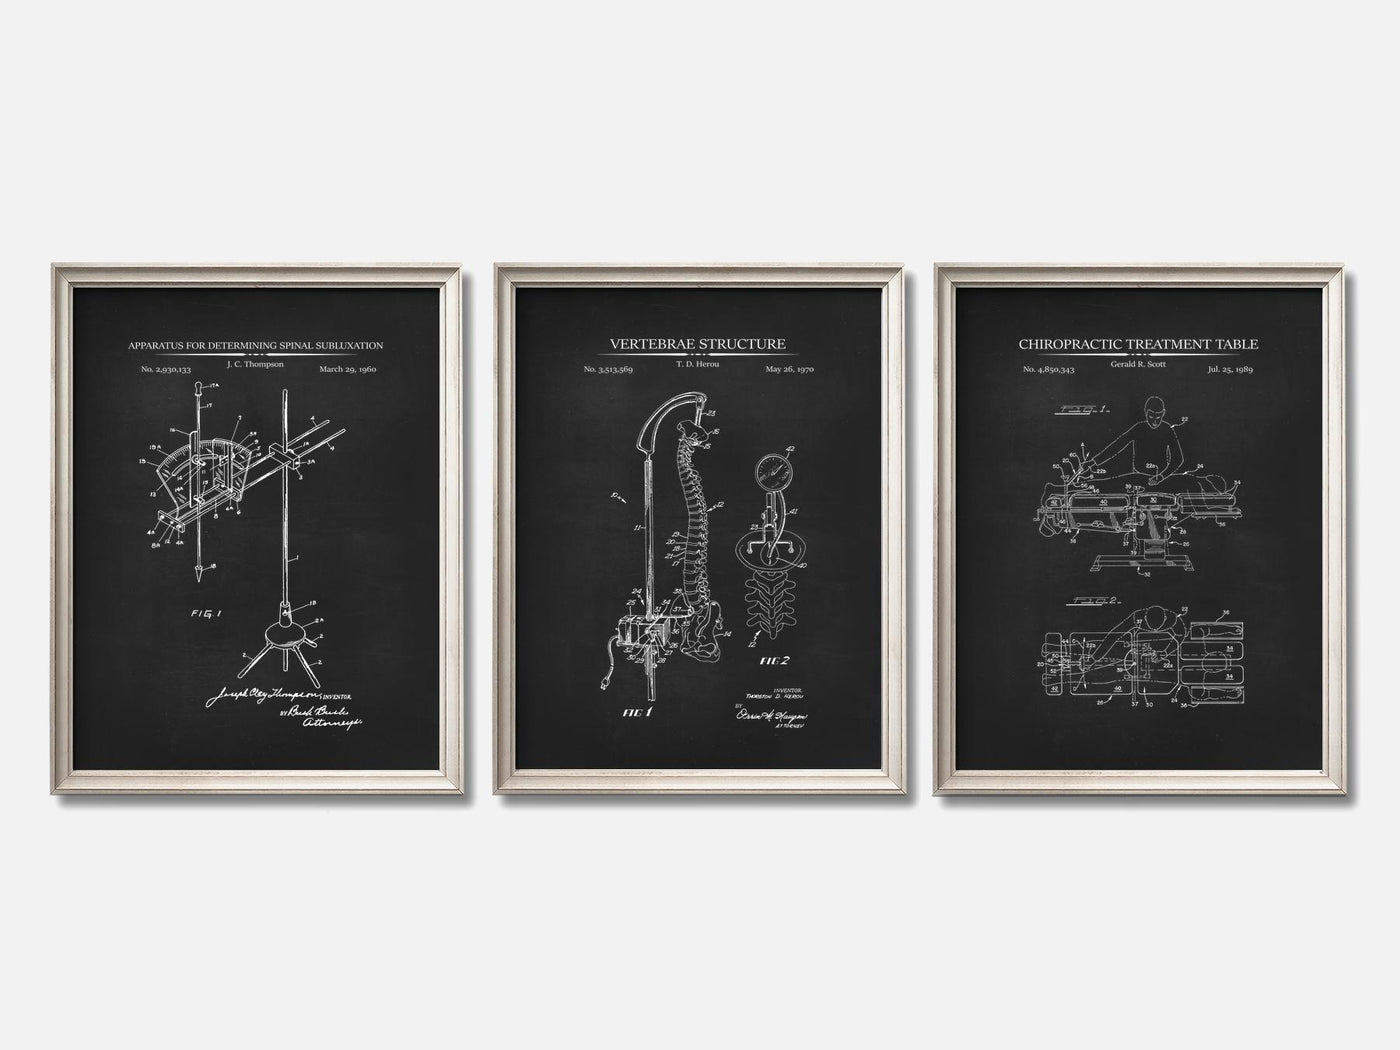 Chiropractic Patent Print Set of 3 mockup - A_t10095-V1-PC_F+O-SS_3-PS_11x14-C_cha variant